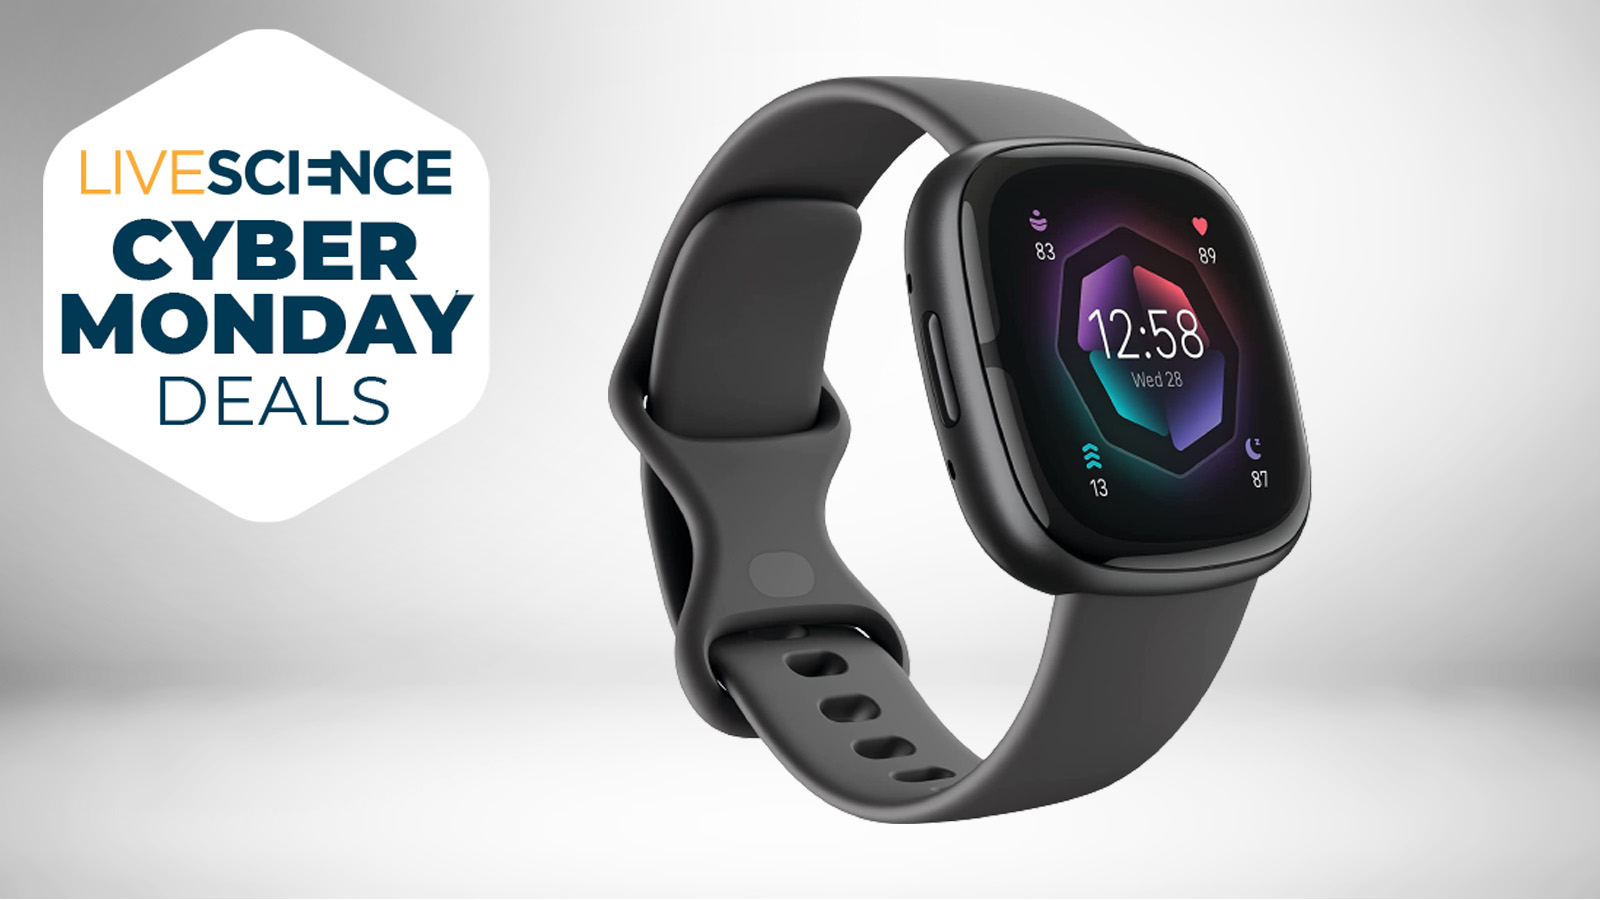 Quick! Just hours left to save $100 on Fitbit's best watch in the Cyber Monday sales